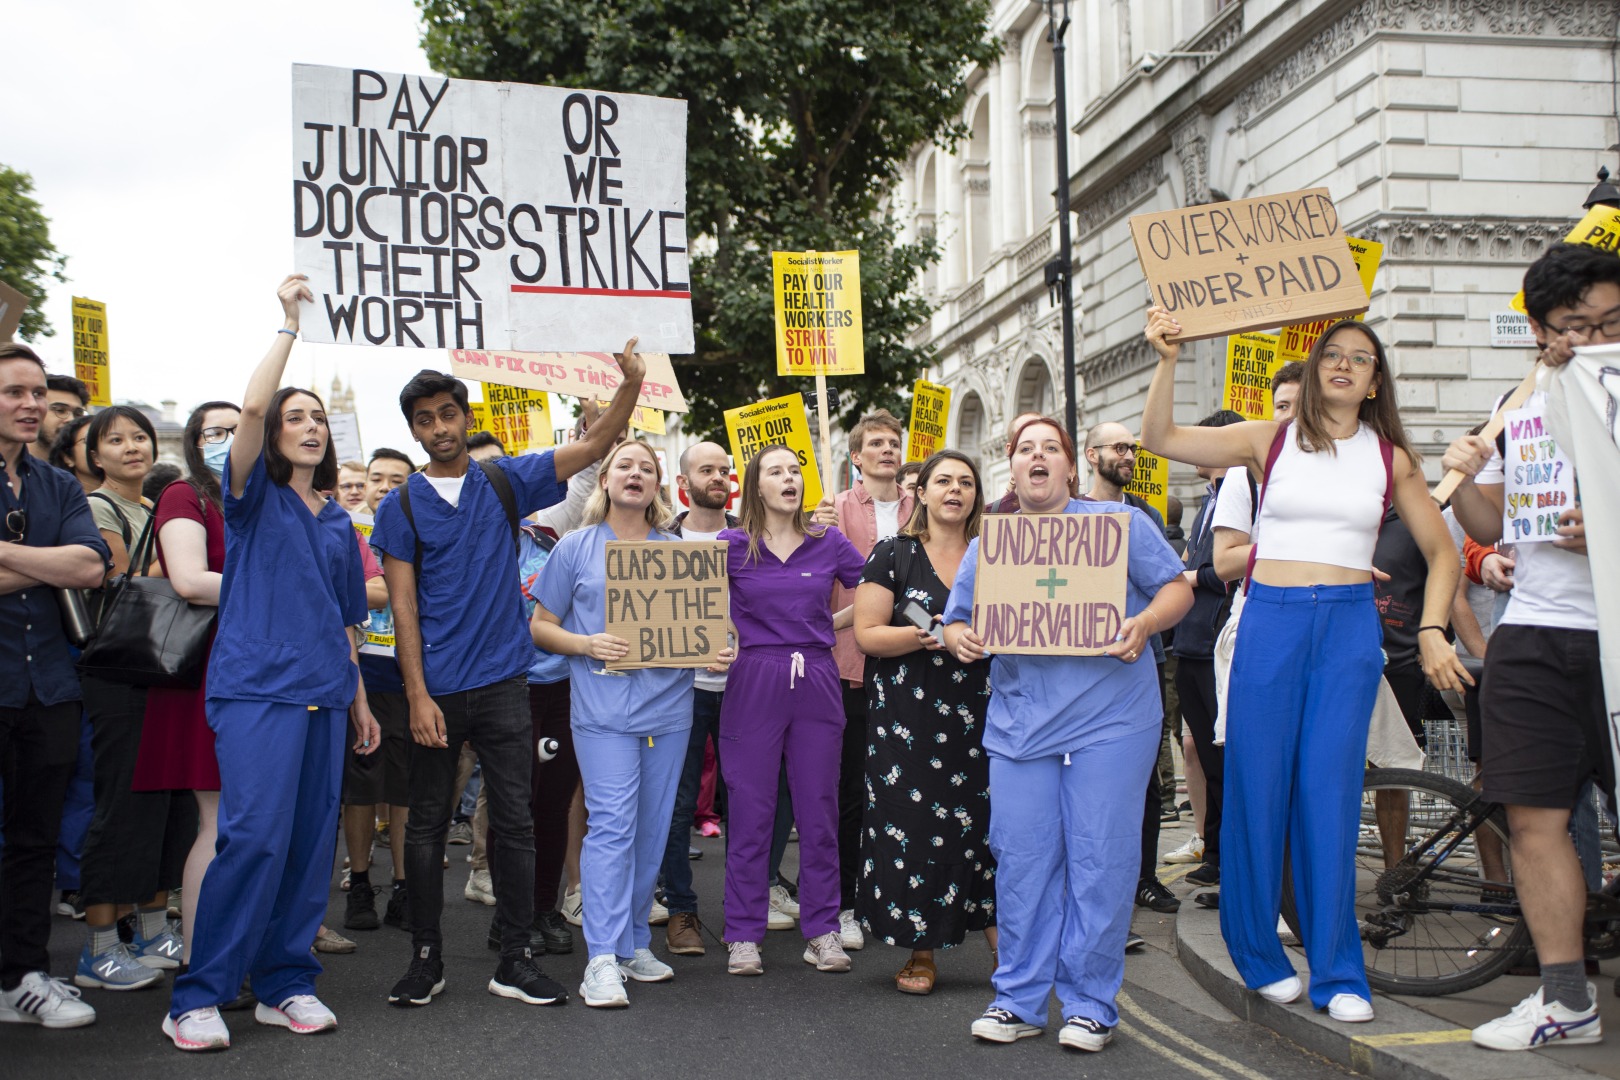 Junior Doctor Strike Leads to Over 175,000 Cancellations Highlighting NHS Crisis